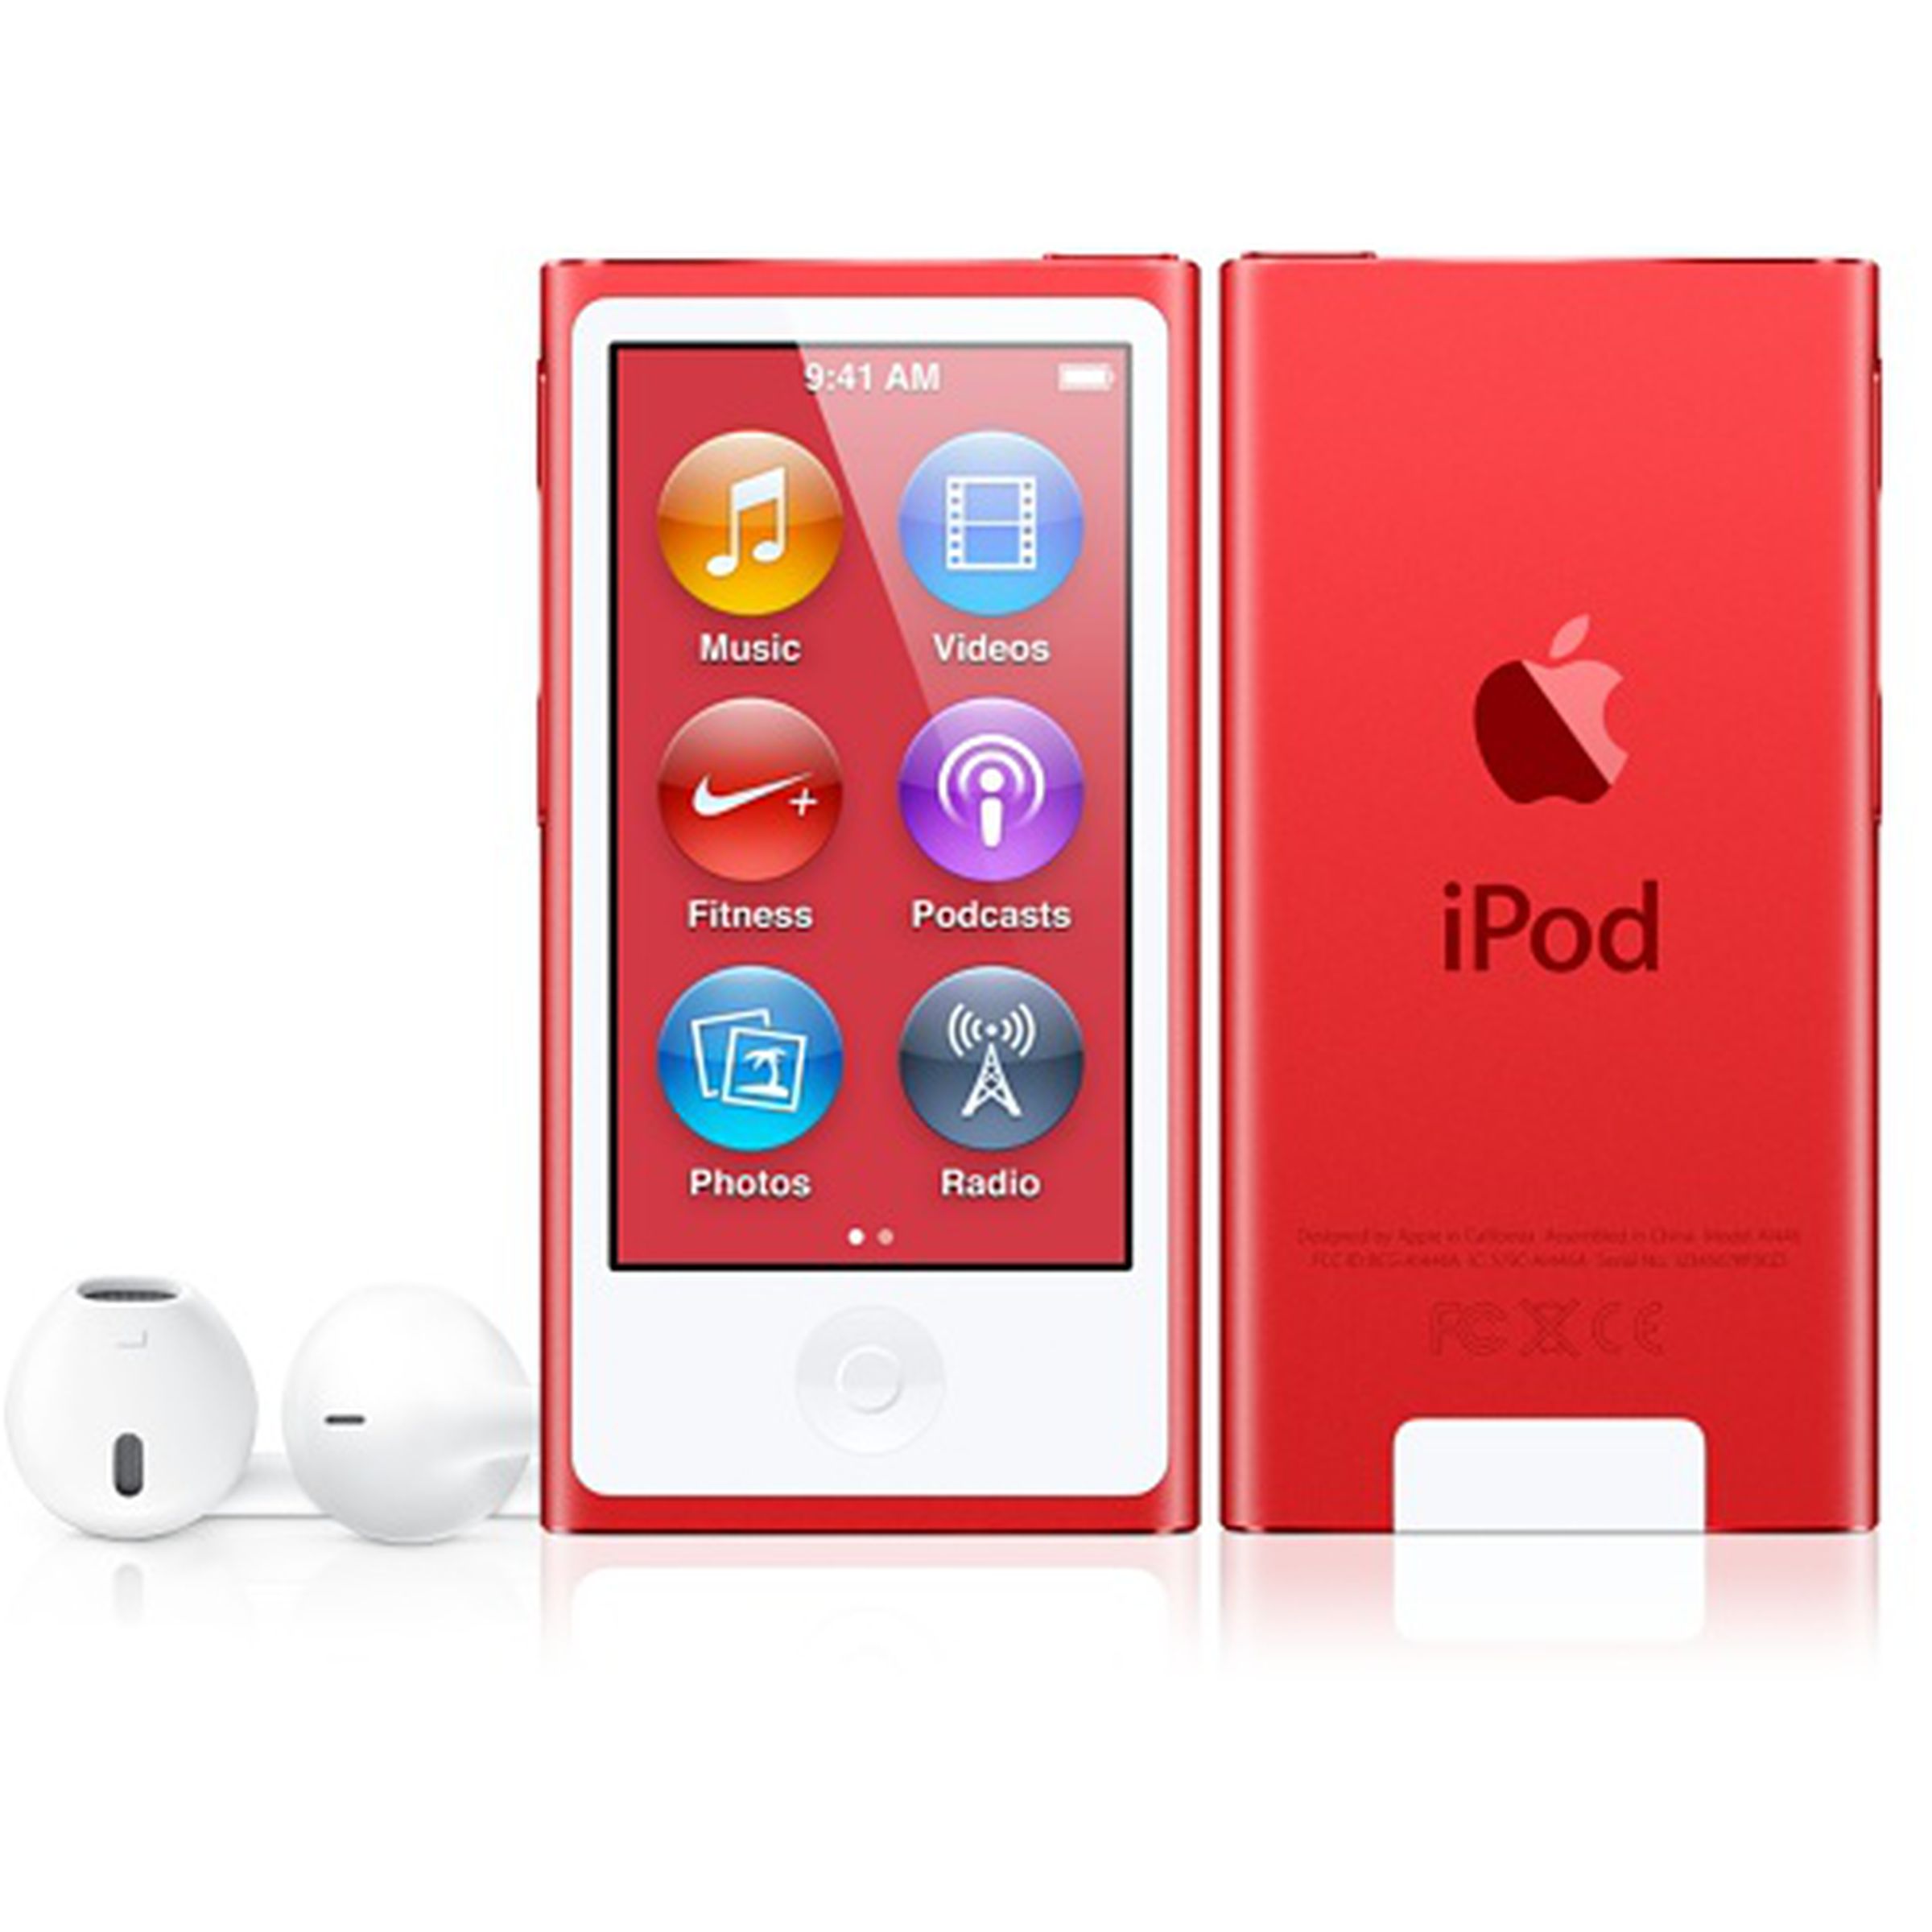 Apple's contributions to Product Red